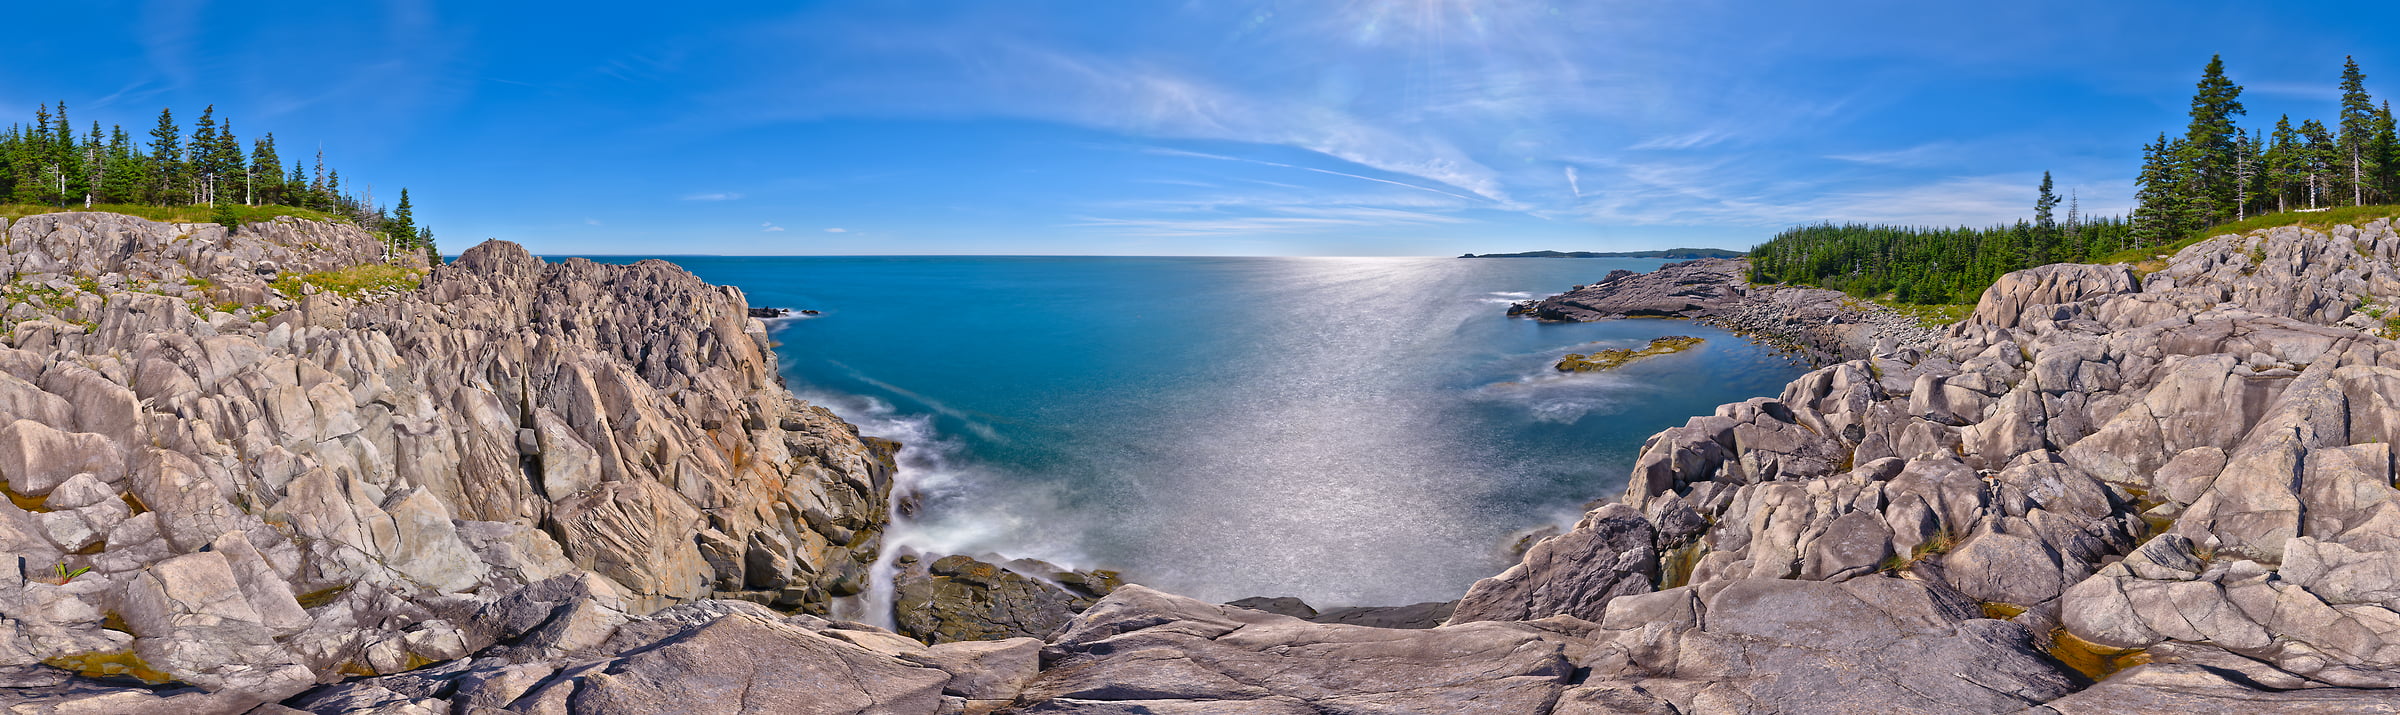 433 megapixels! A very high resolution, large-format VAST photo of the Bold Coast of Maine in New England; fine art landscape panorama photograph created by Aaron Priest in Cutler, Maine.